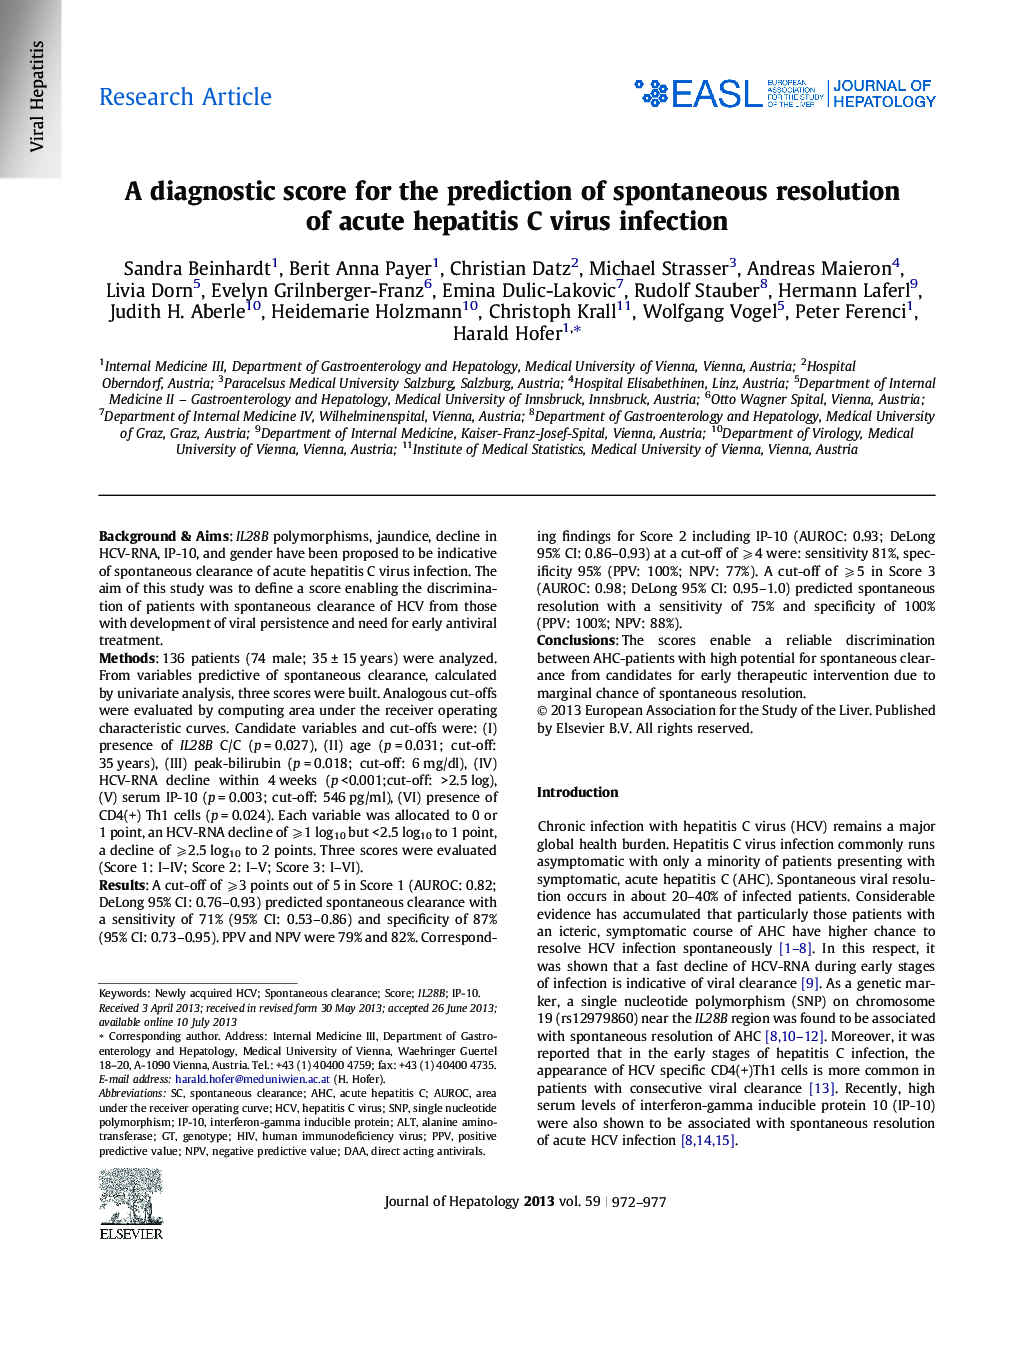 Research ArticleA diagnostic score for the prediction of spontaneous resolution of acute hepatitis C virus infection